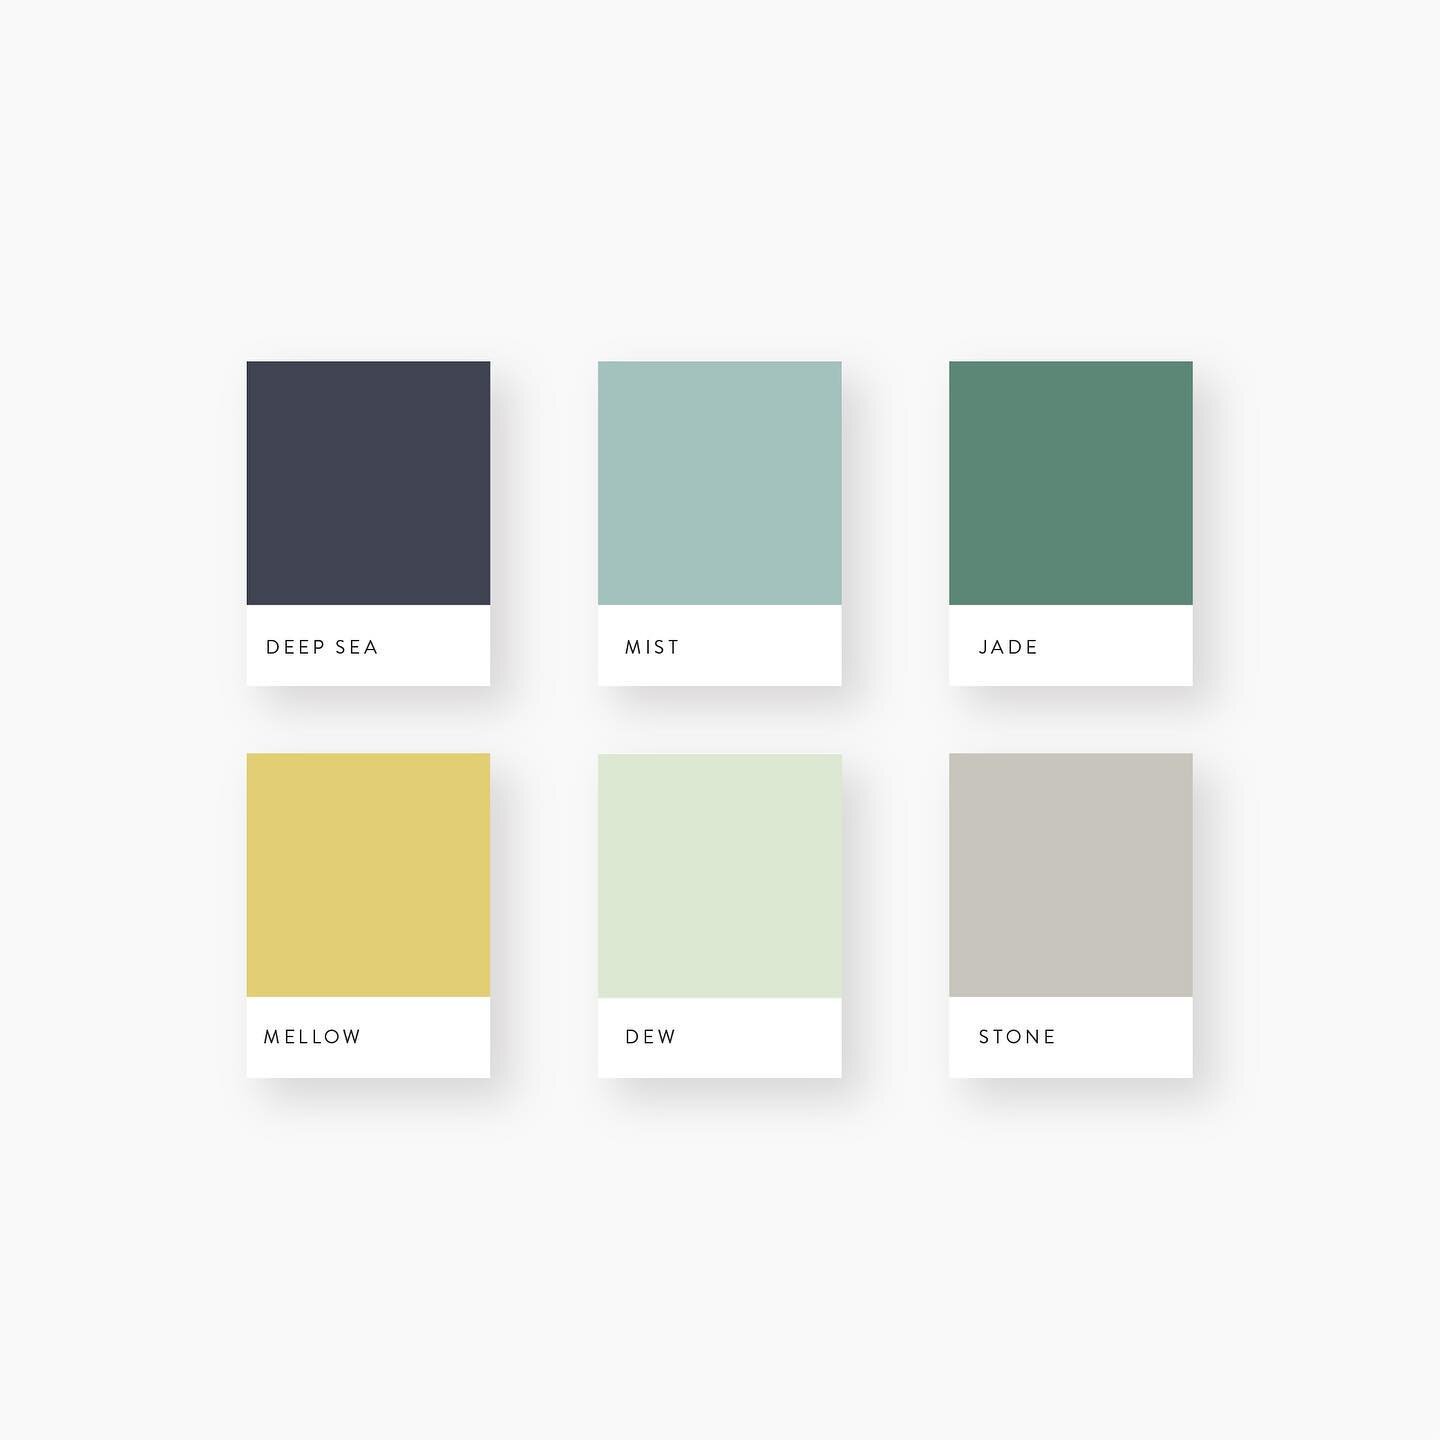 We built out this flexible color palette for Heidi's brand, with Deep Sea and Mist used most prominently, and Jade, Mellow, Dew, and Stone used sparingly as accents when needed.